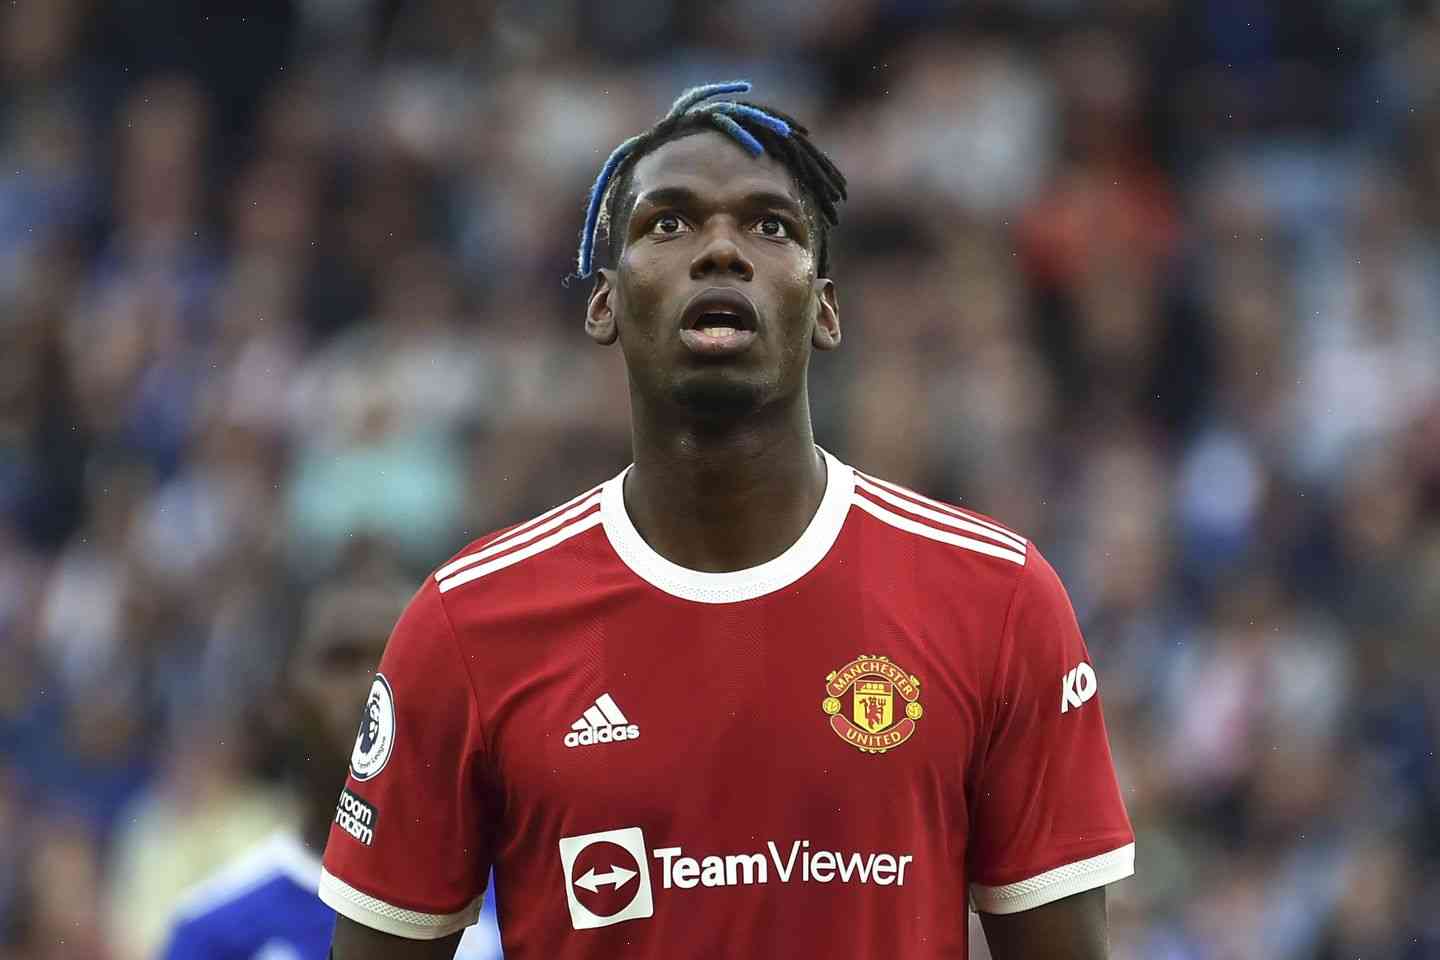 Paul Pogba's brother accused of attacking police officer with bicycle pump